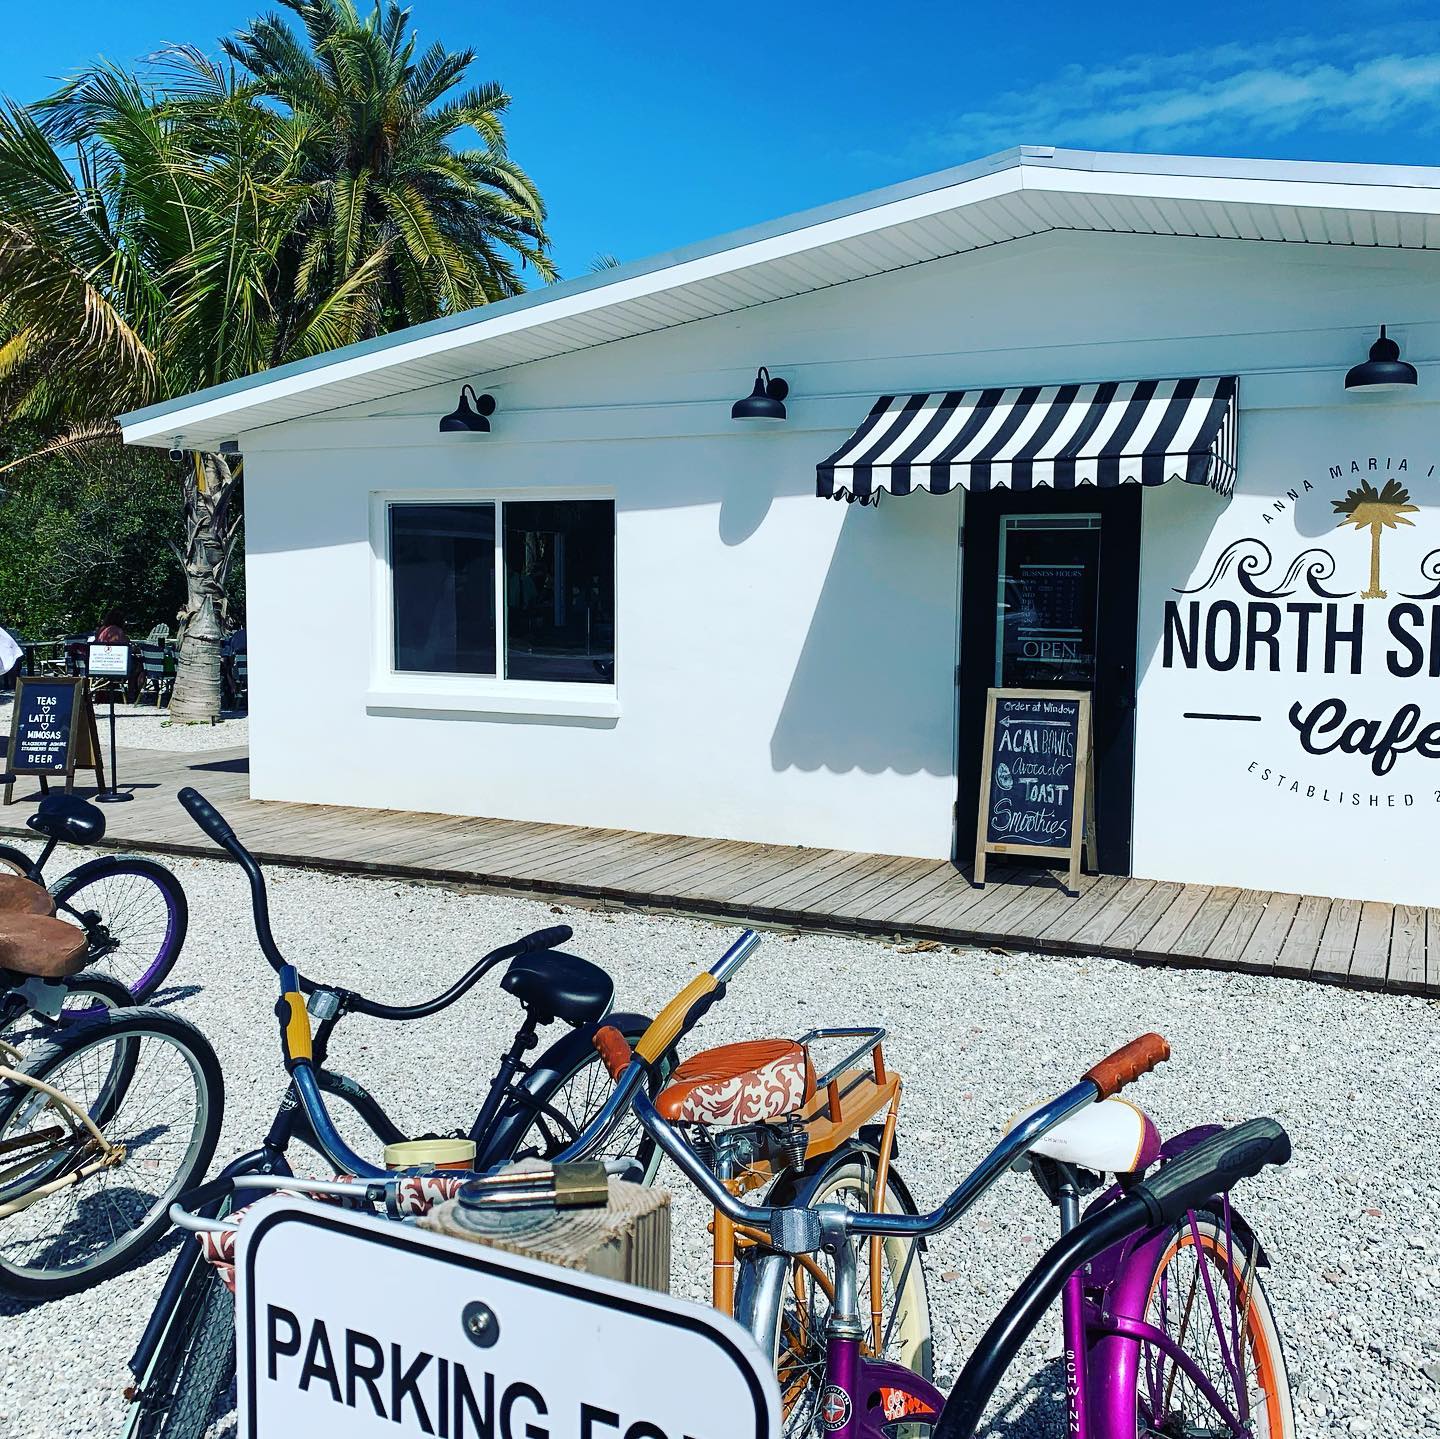 Cafes Guide - North Shore Cafe